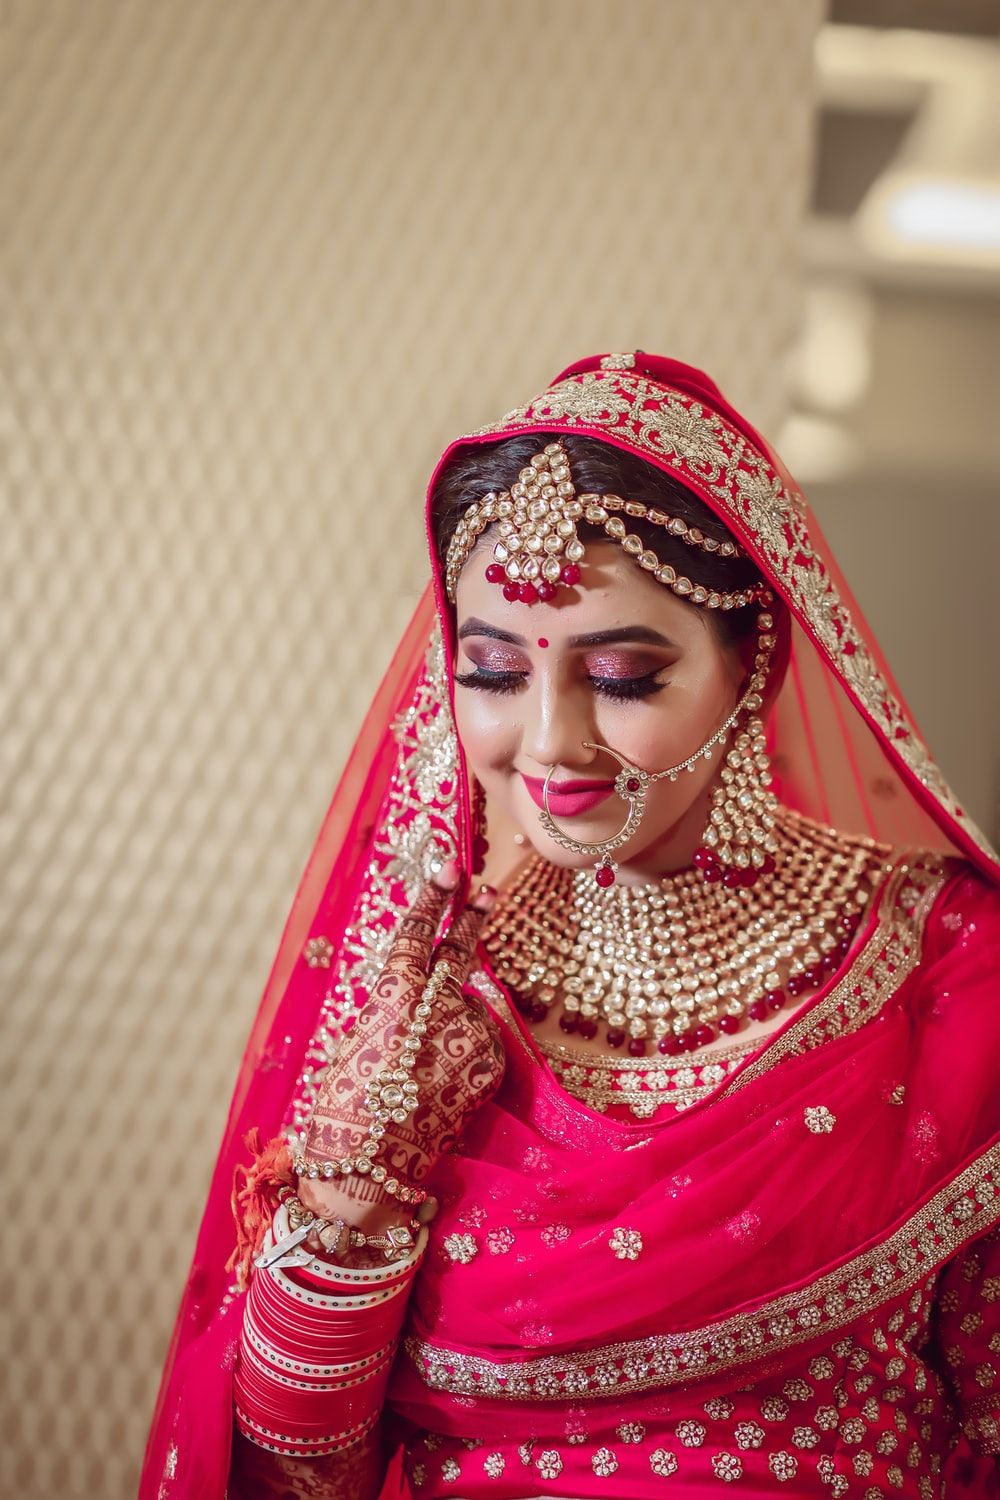 Indian Bride Picture. Download Free Image